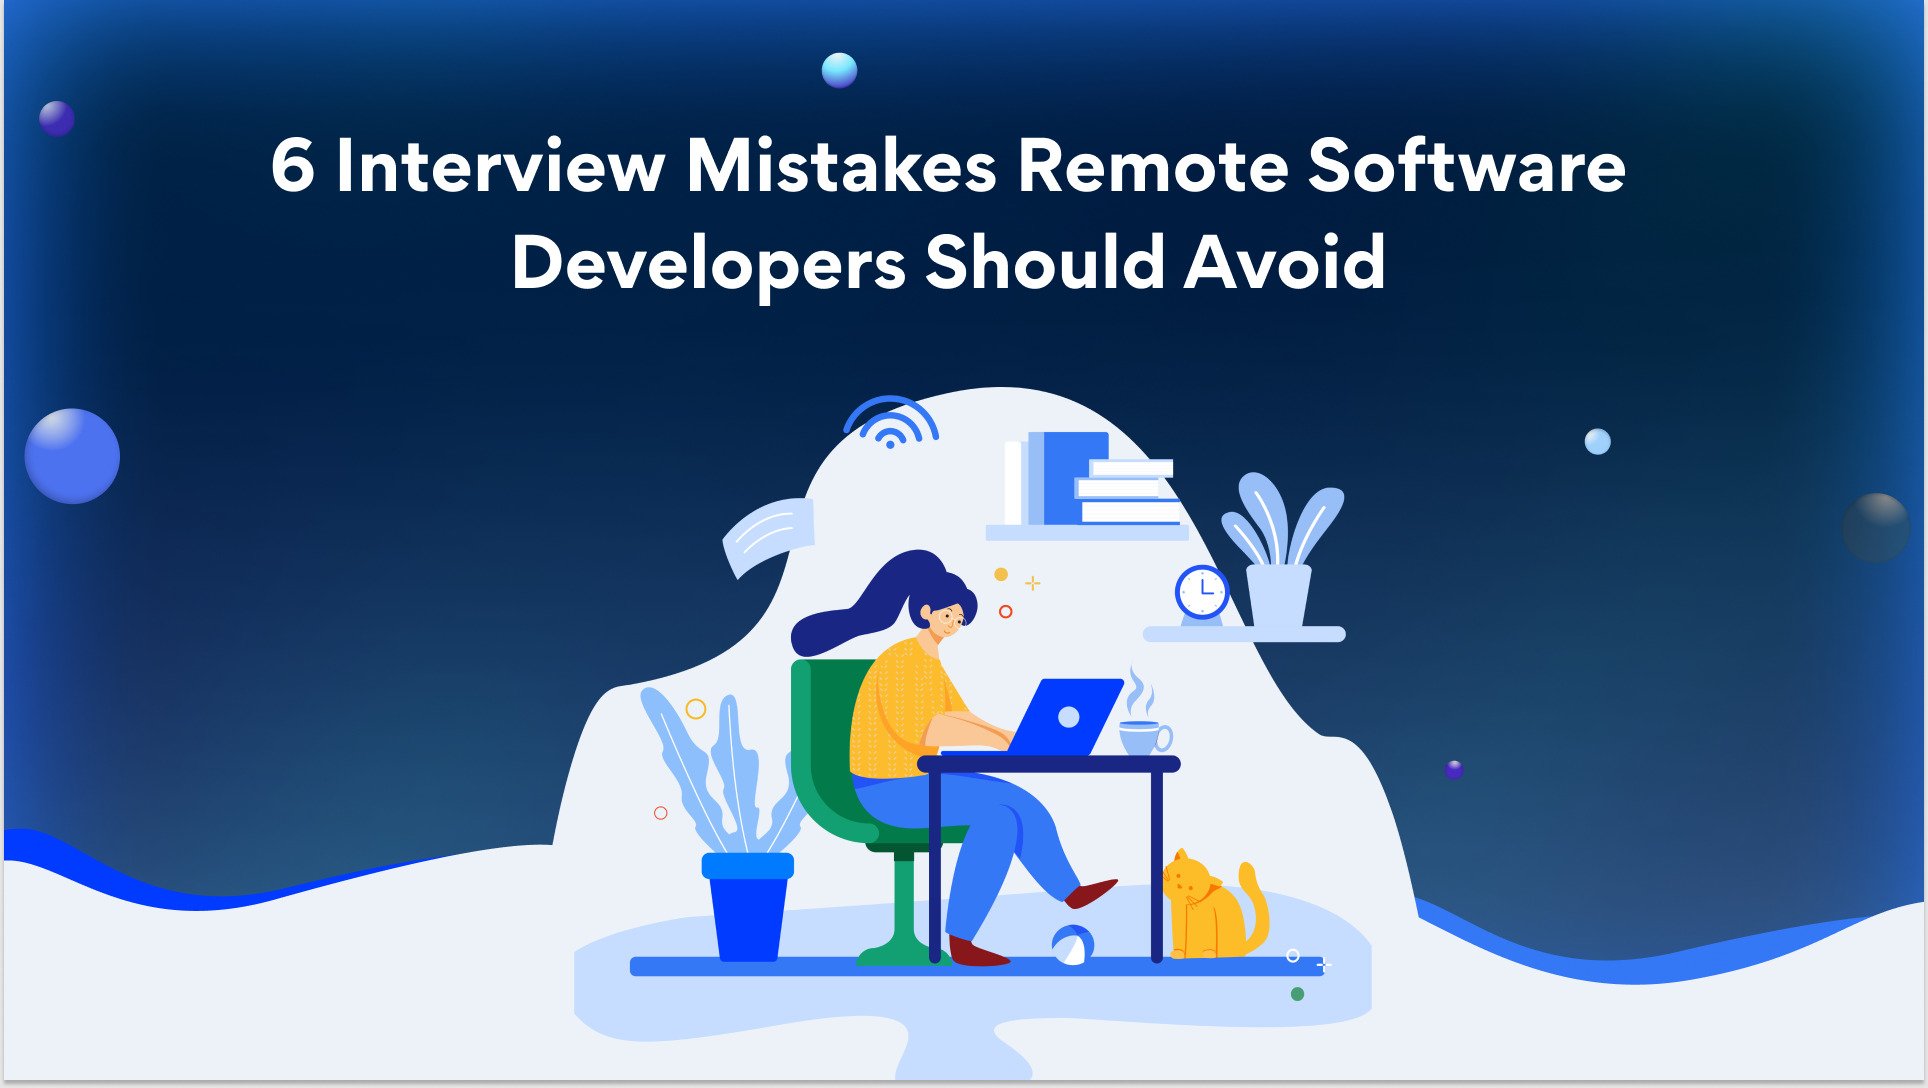 Common interview mistakes developers make